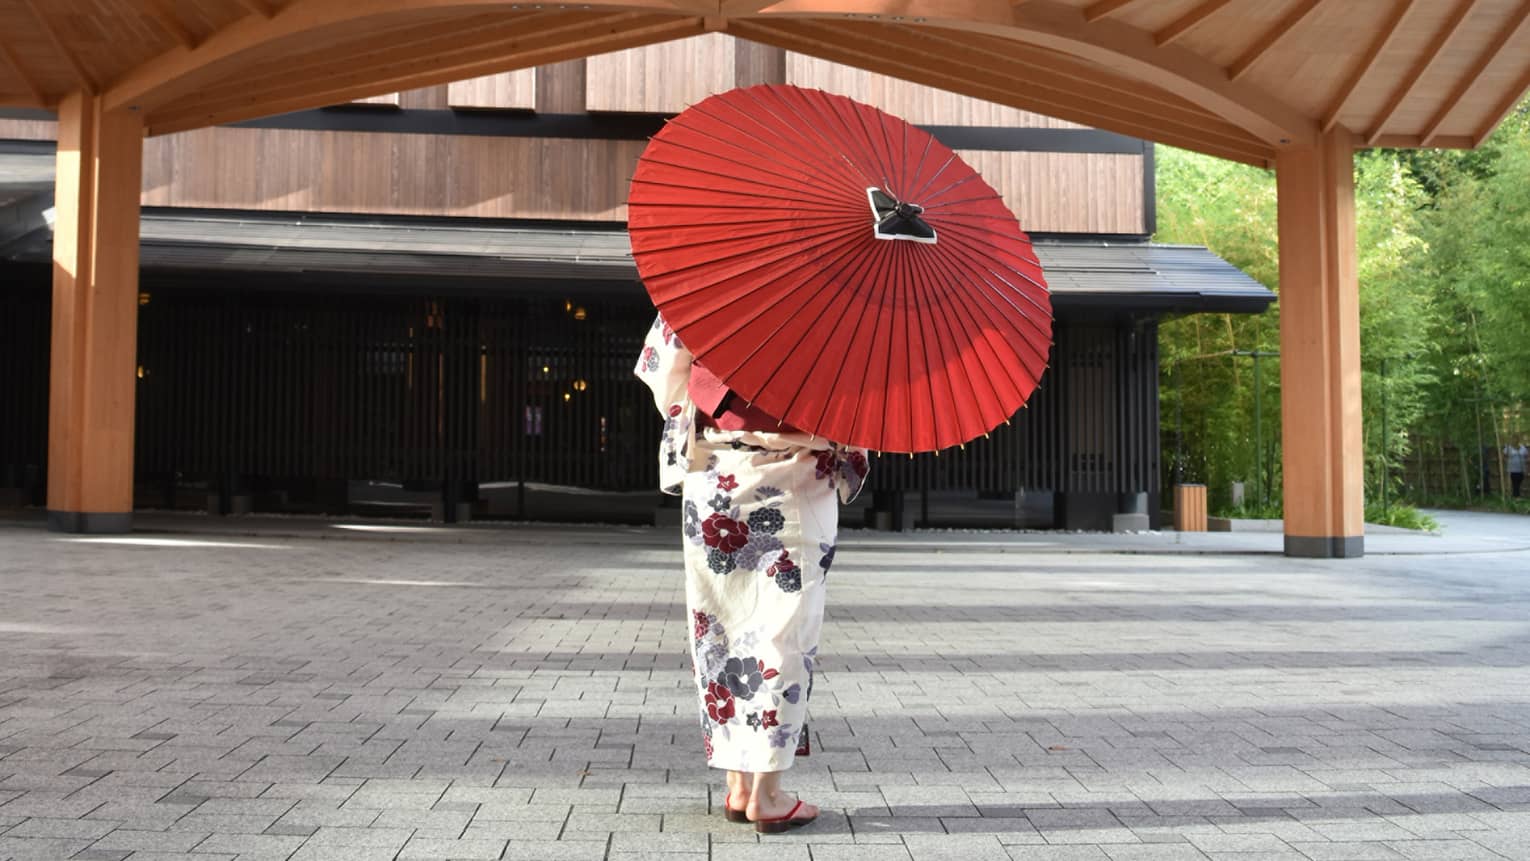 Rear view of a person under a wooden structure, in a white, flower-printed kimono, partially hidden by a red paper umbrella.